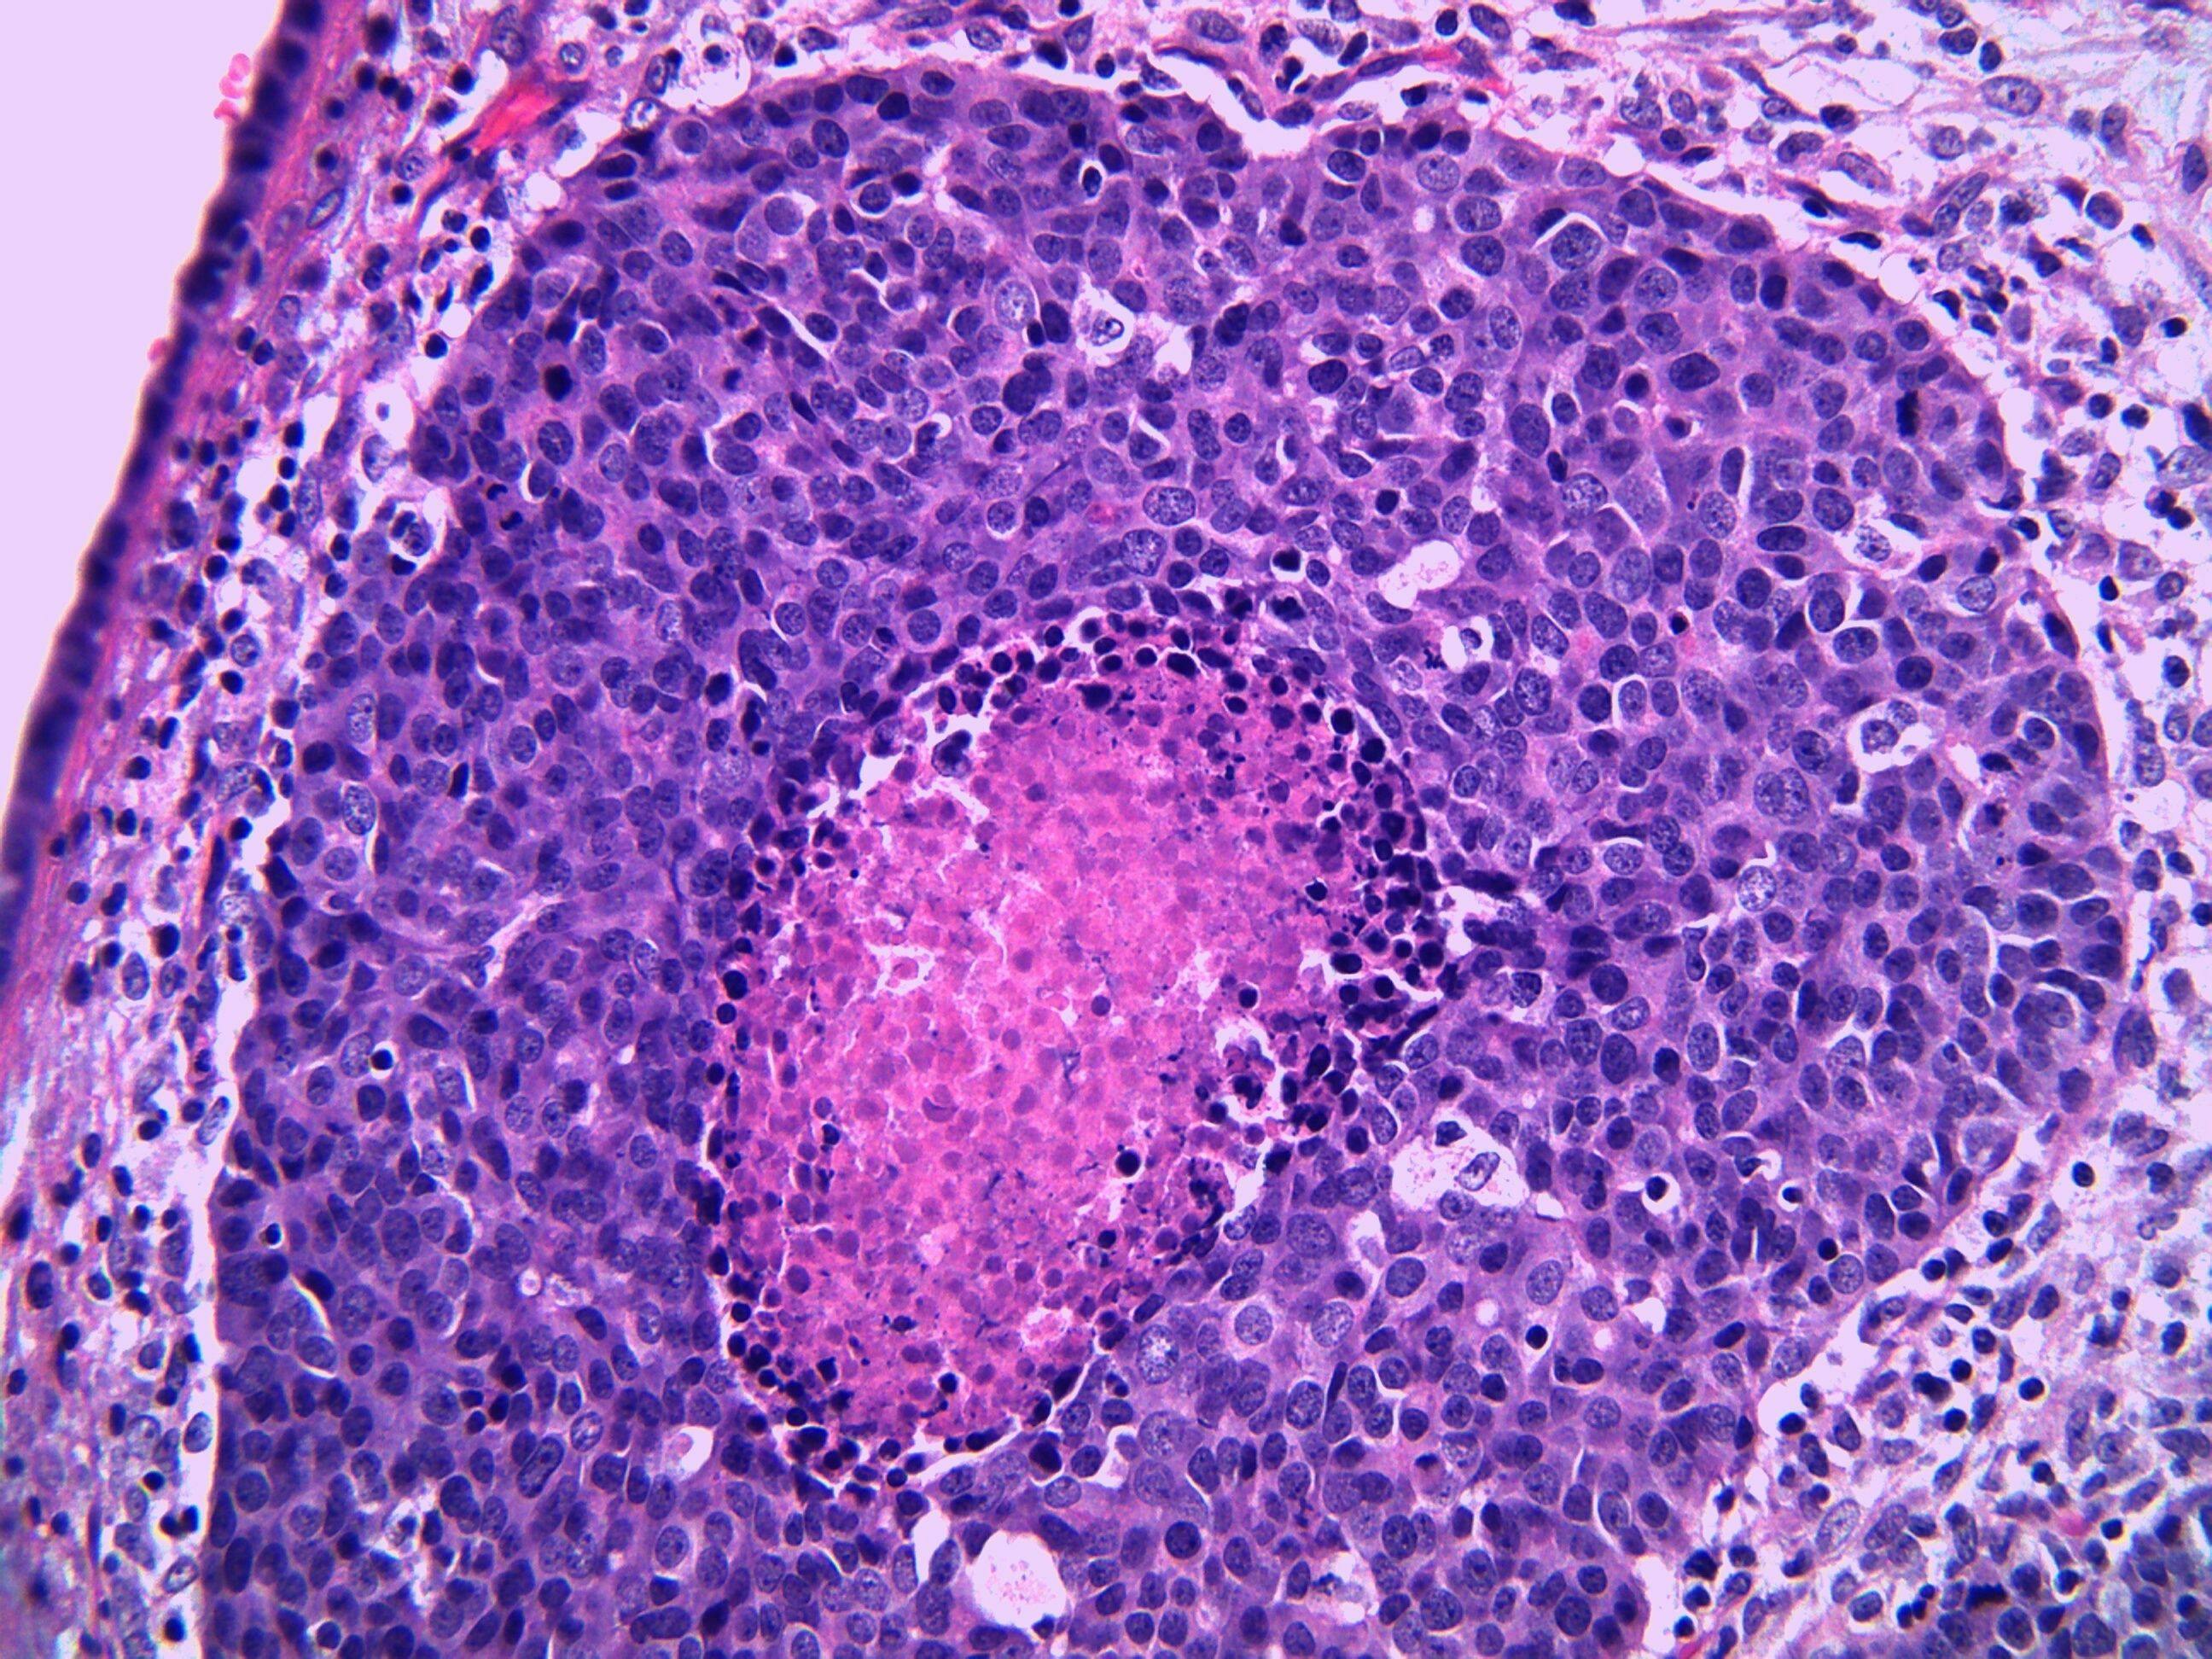 Detail of high grade urothelial carcinoma of the ureter in a man. The tumor has central necrosis which appears pink. Microscopic view.